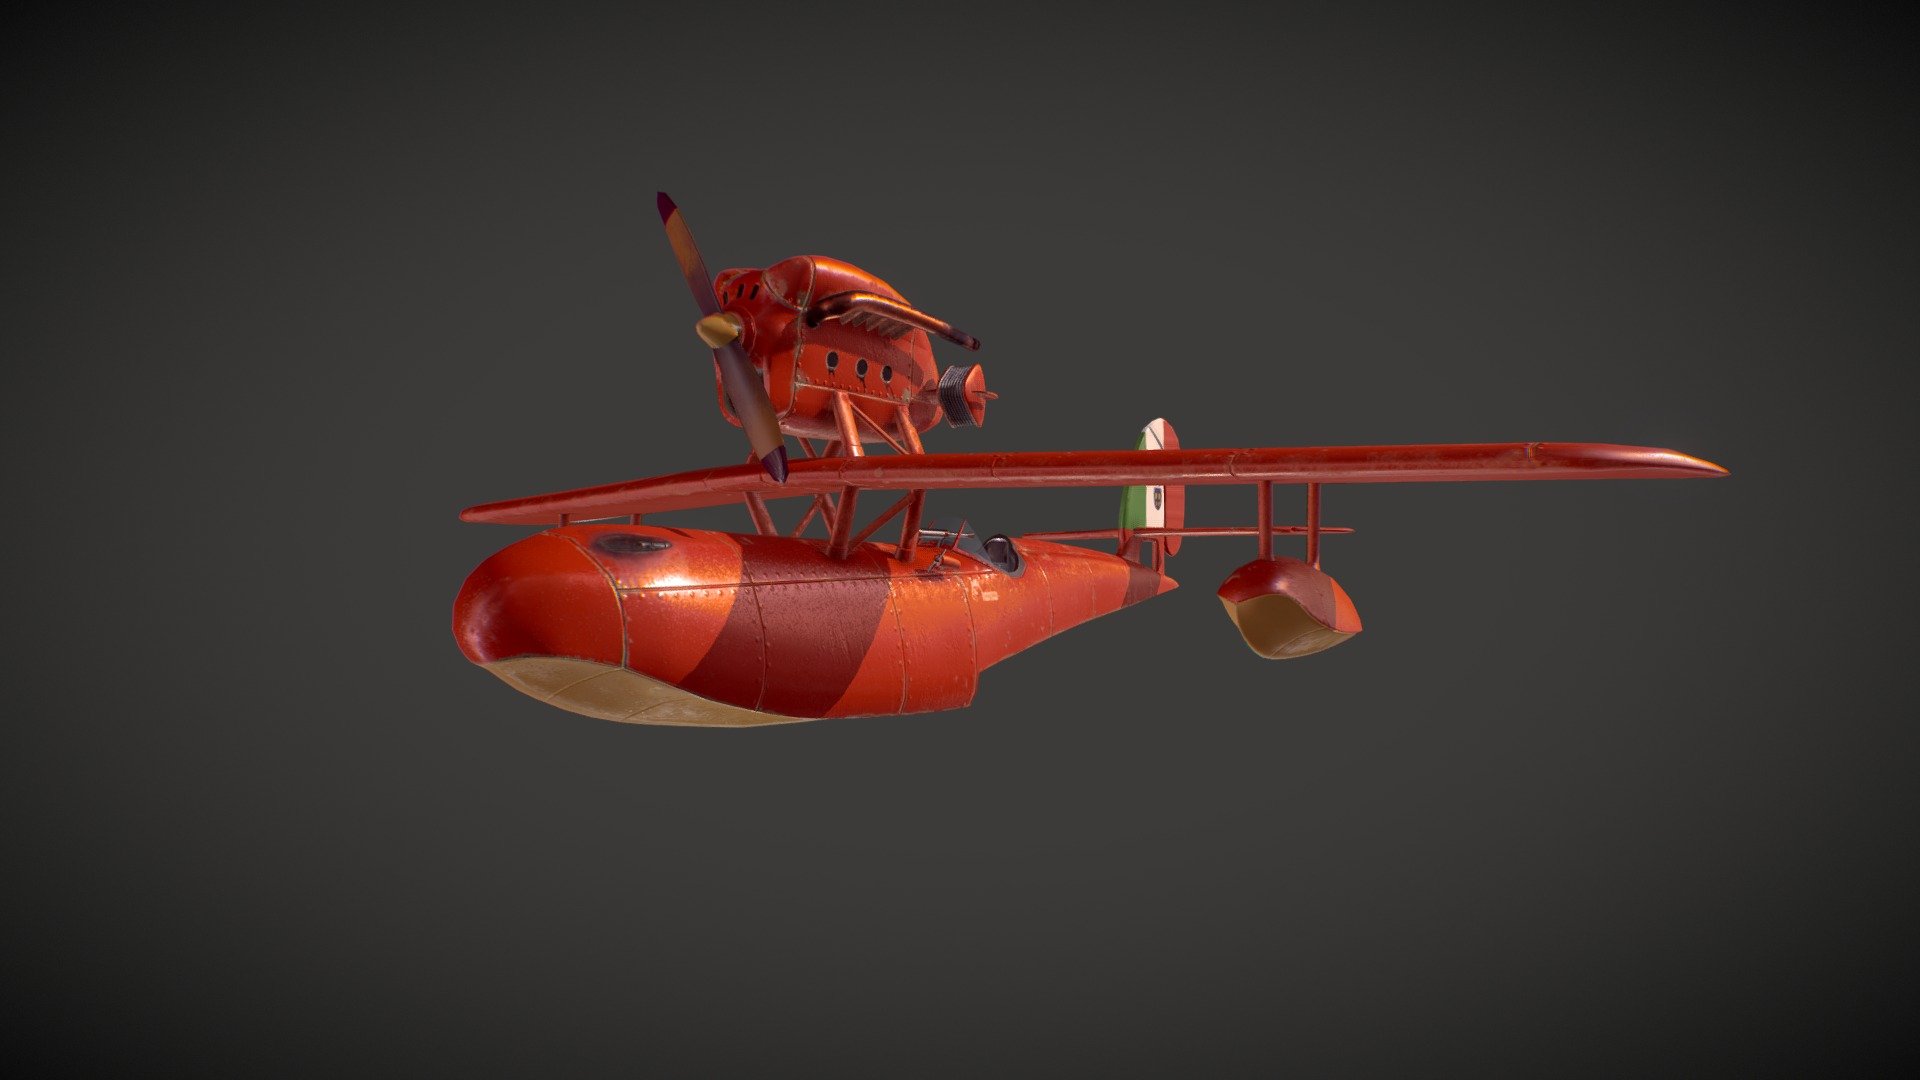 The famous plane from Porco Rosso 3d model